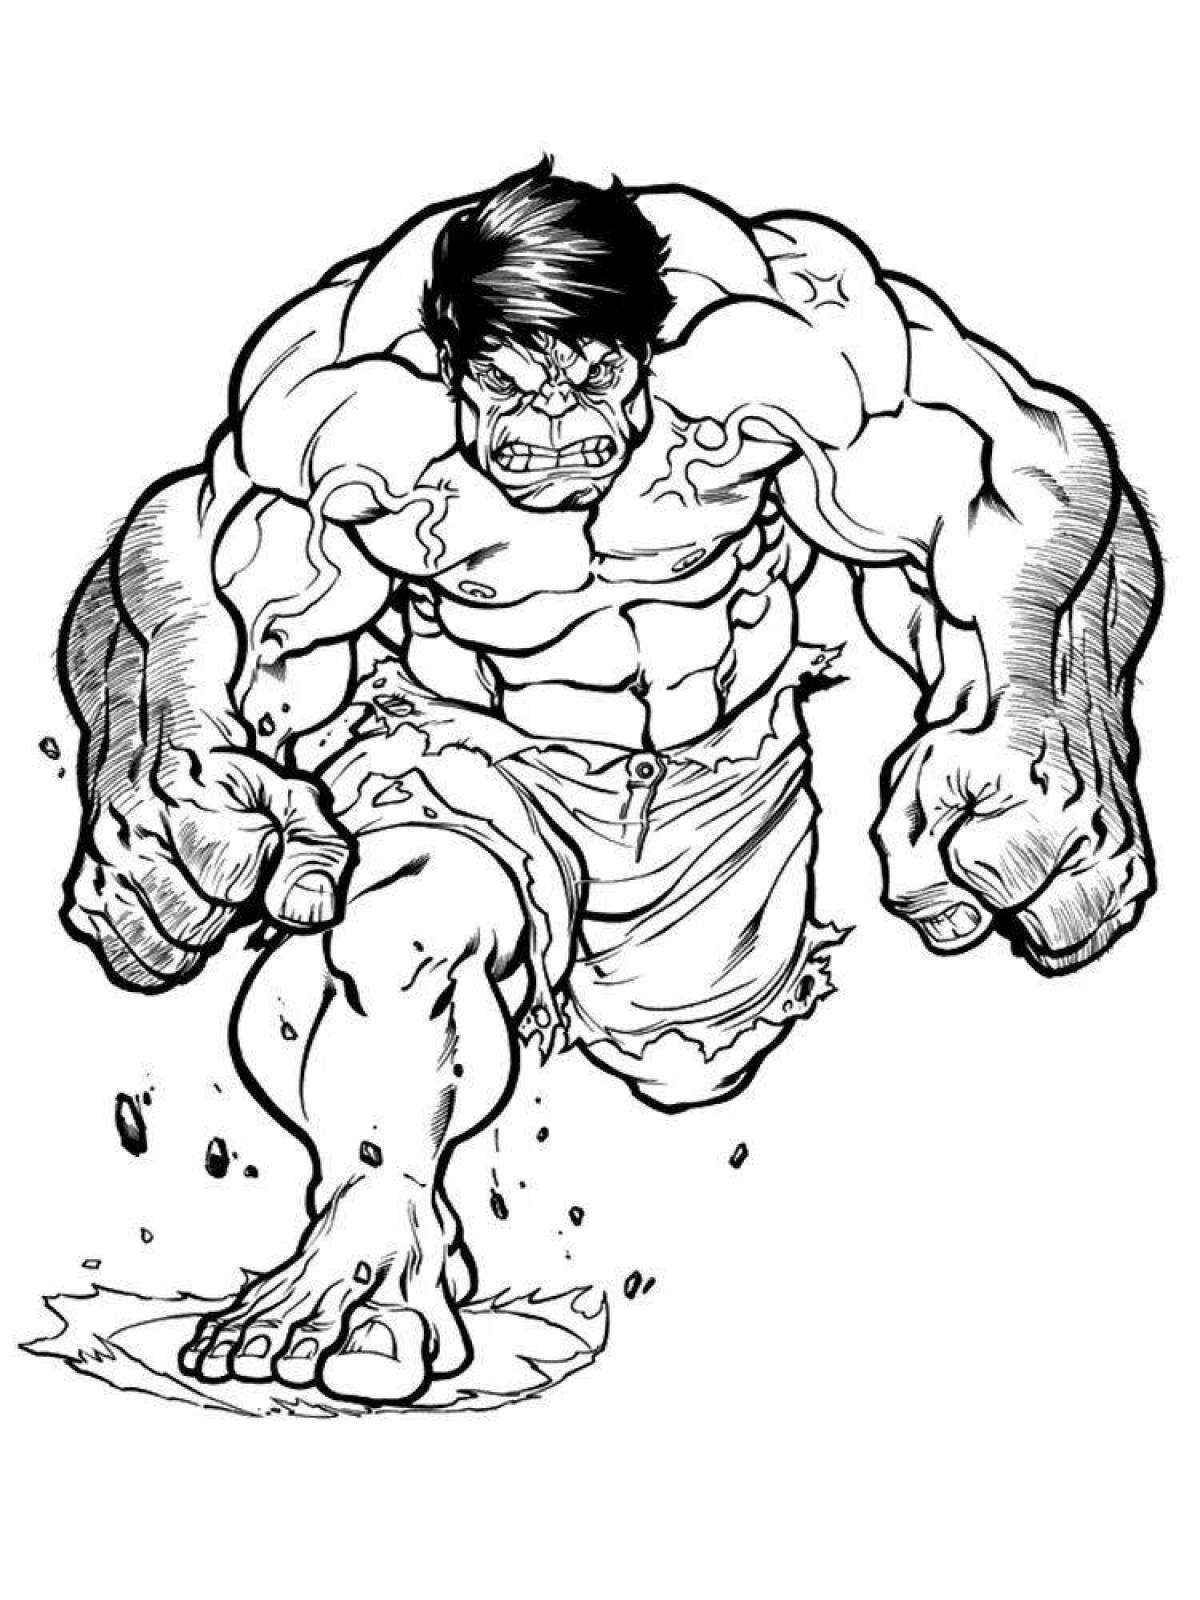 Detailed coloring of the hulk